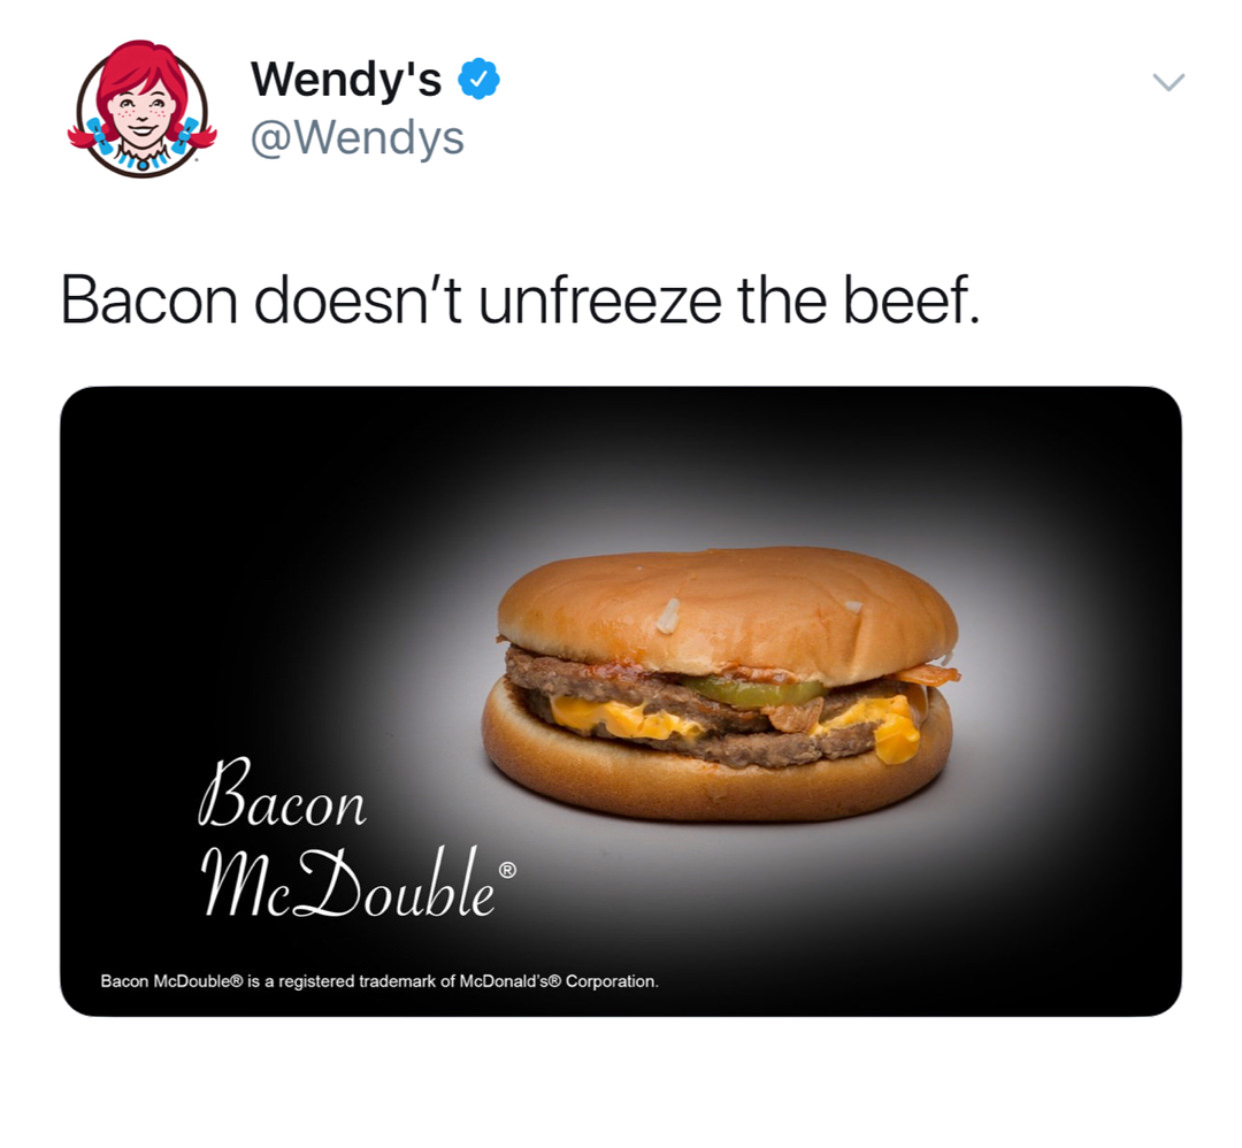 four for four meme wendys - Wendy's Bacon doesn't unfreeze the beef. Bacon McDouble Bacon McDouble is a registered trademark of McDonald's Corporation.